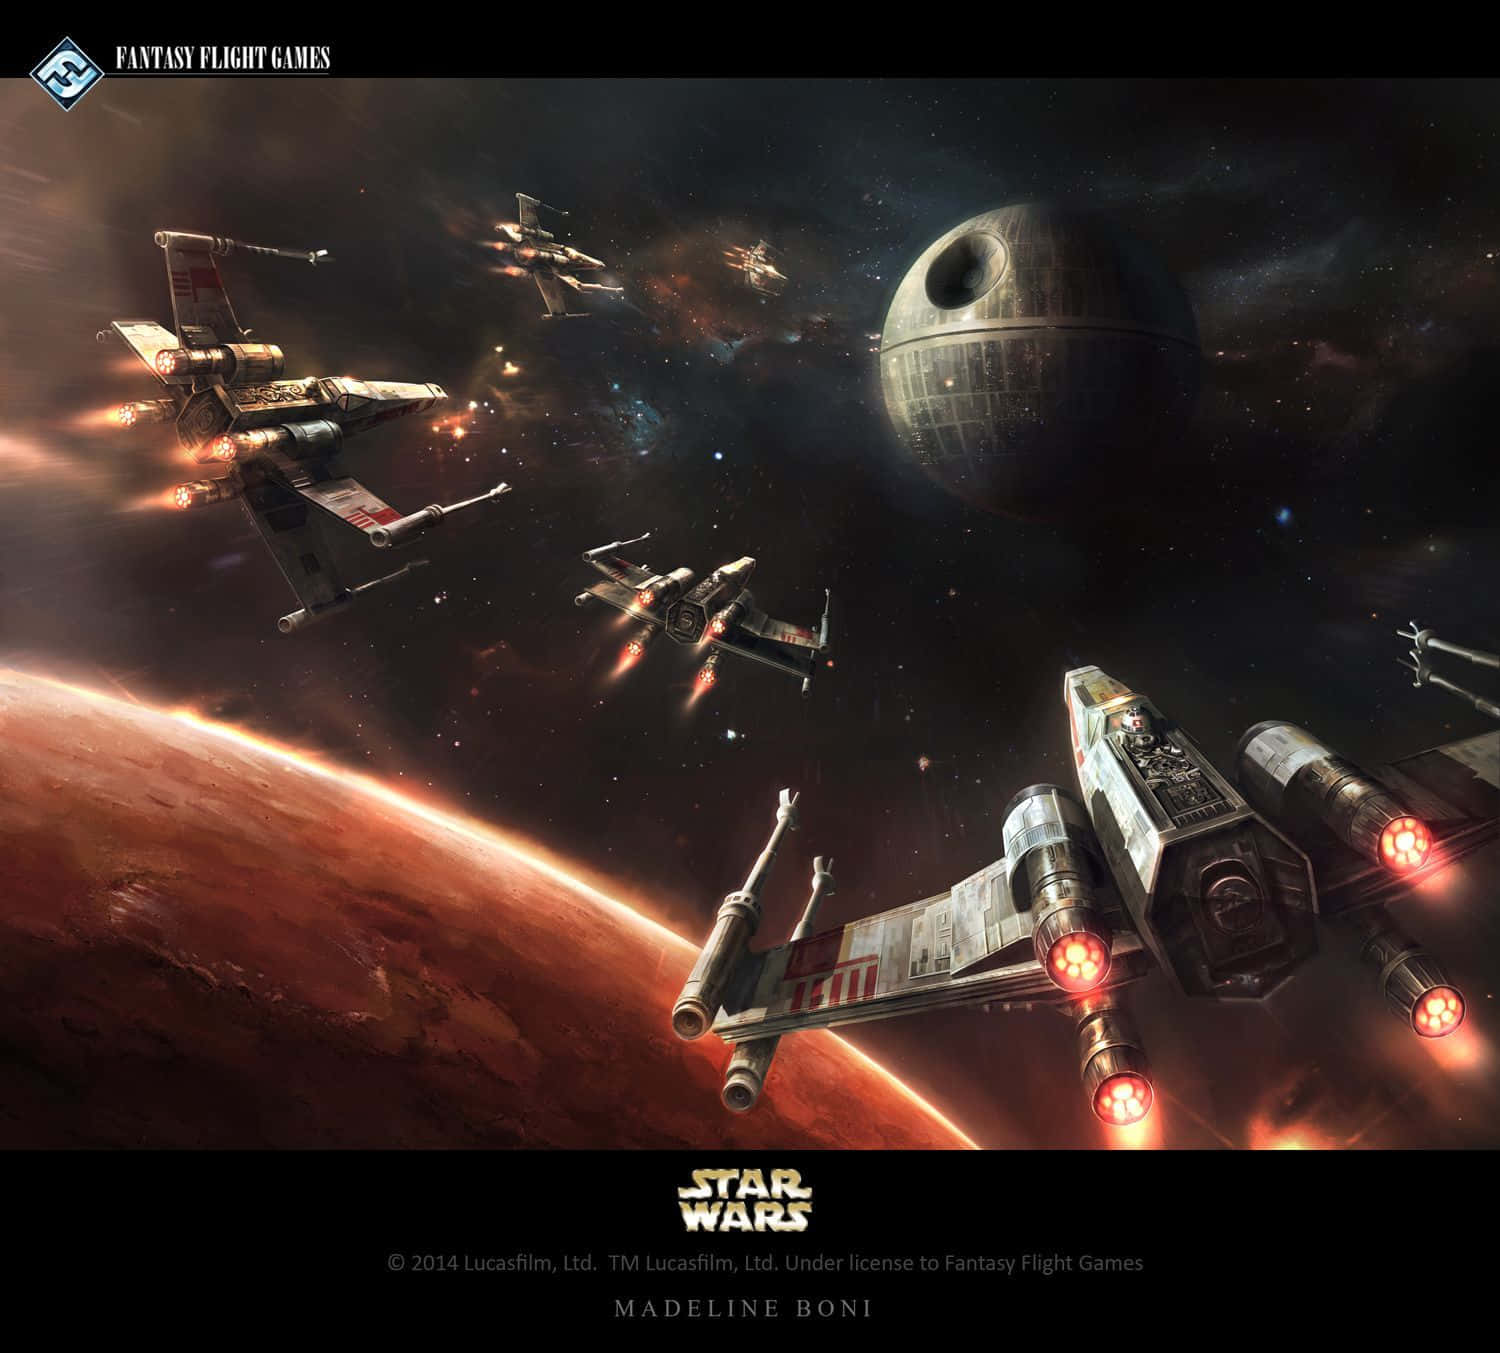 The Rebel Alliance against the Galactic Empire in The Battle of Yavin Wallpaper